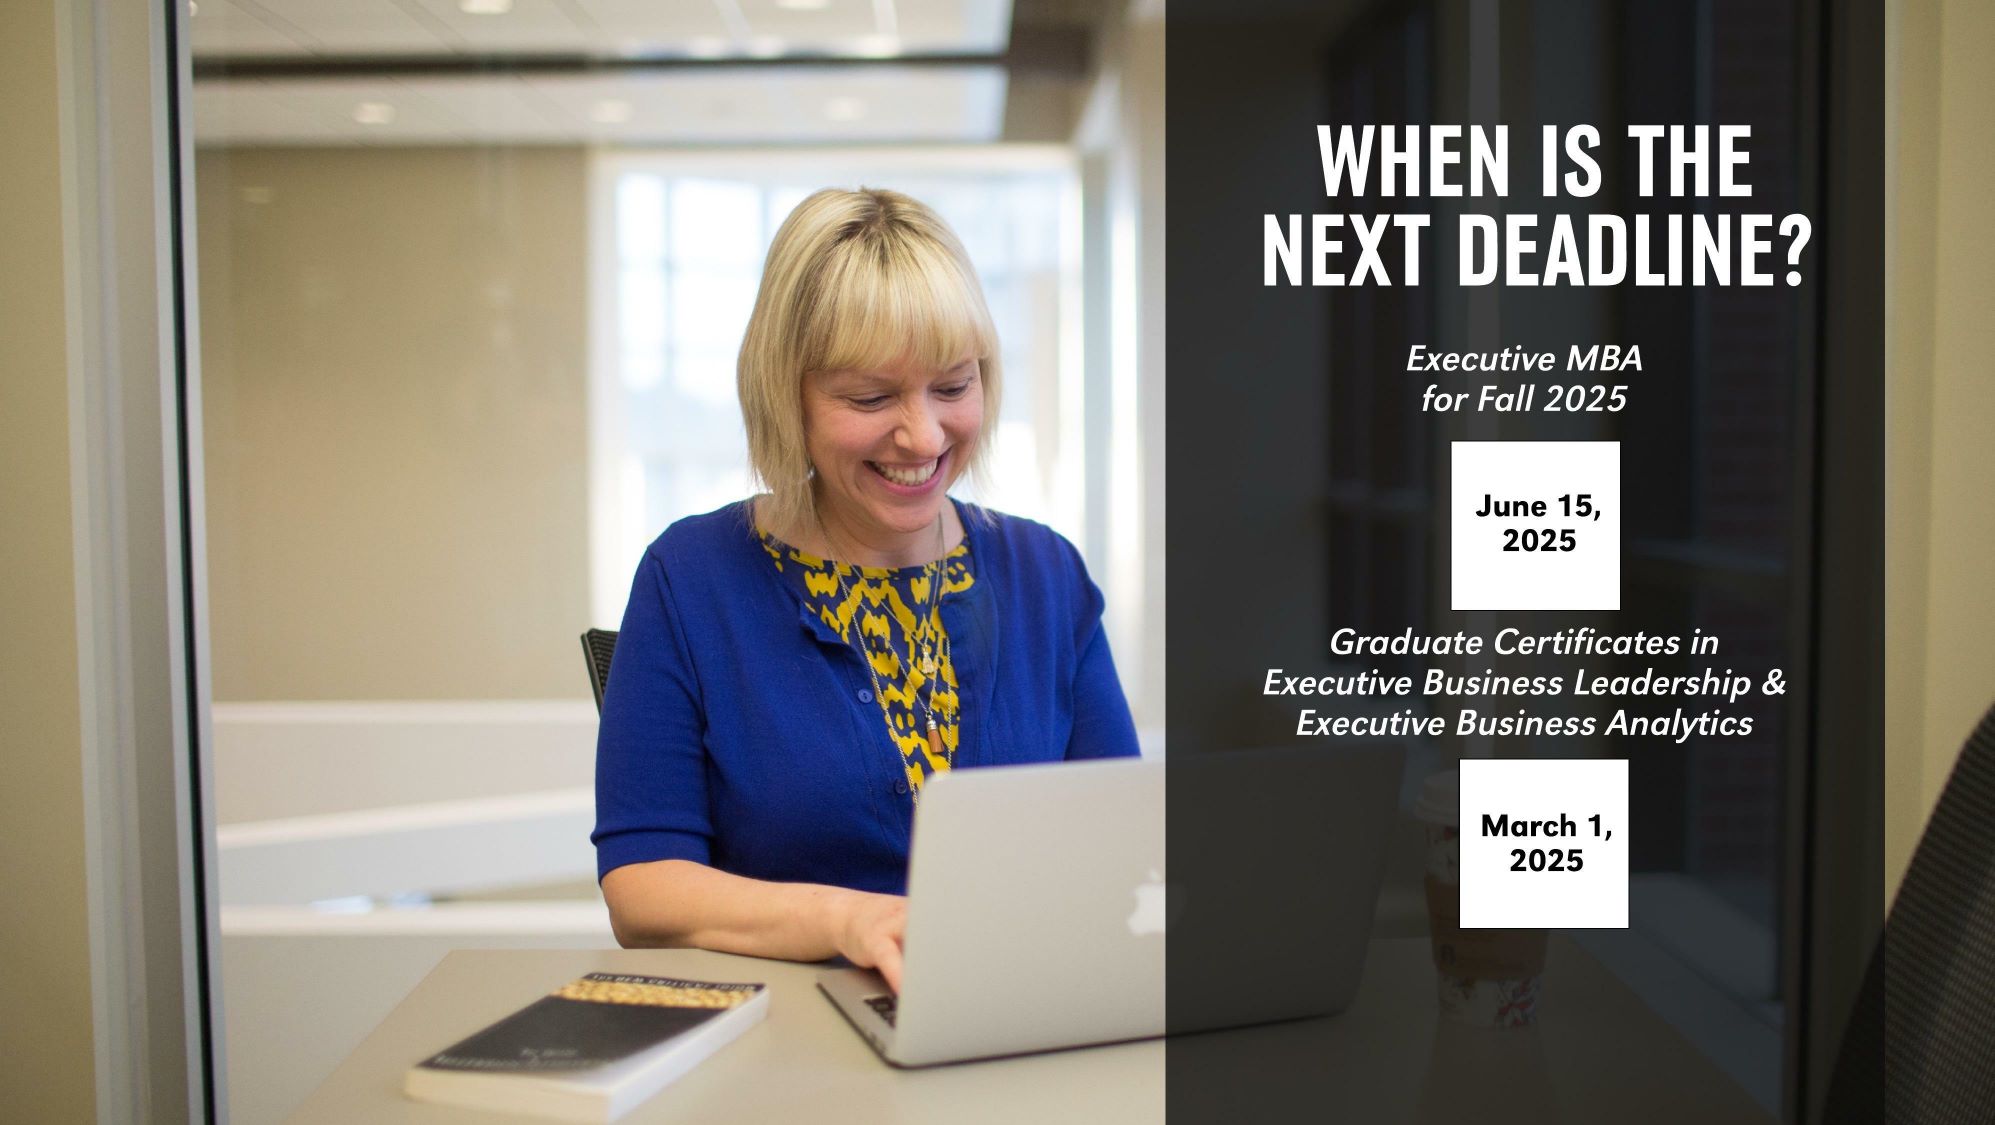 executive mba application deadline for fall 2025 is June 15, 2025 and deadline for executive graduate certificates is March 1, 2025